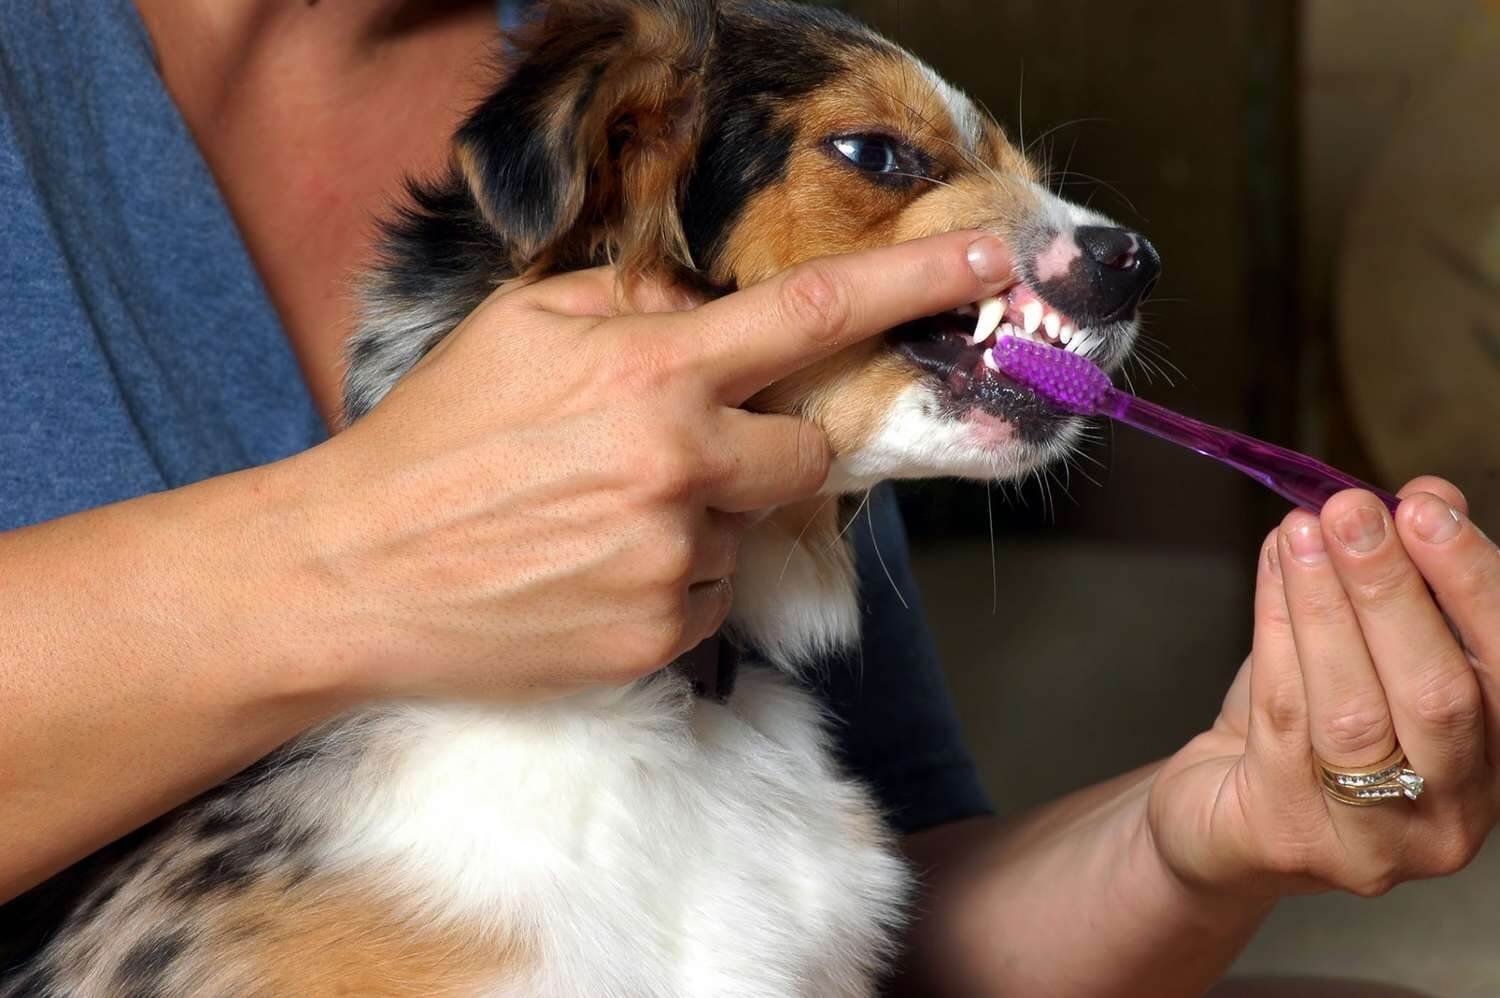 brush gently your dog after a tooth extraction